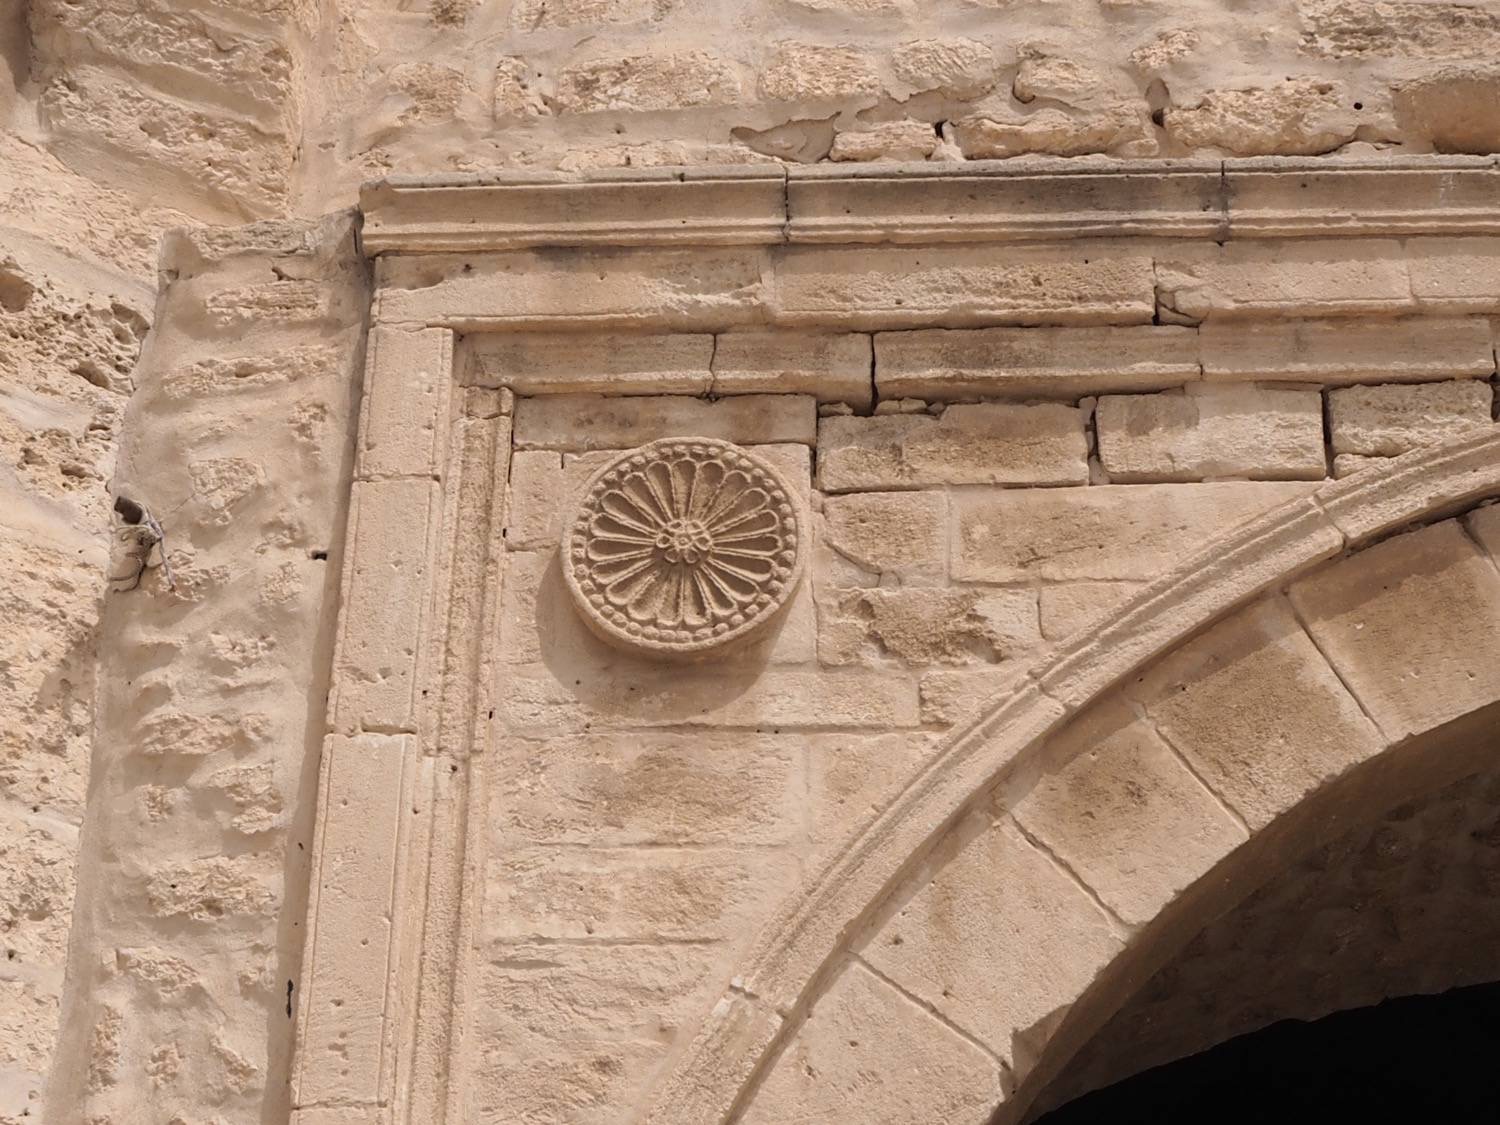 Detail view of a medallion in the frame above the arch